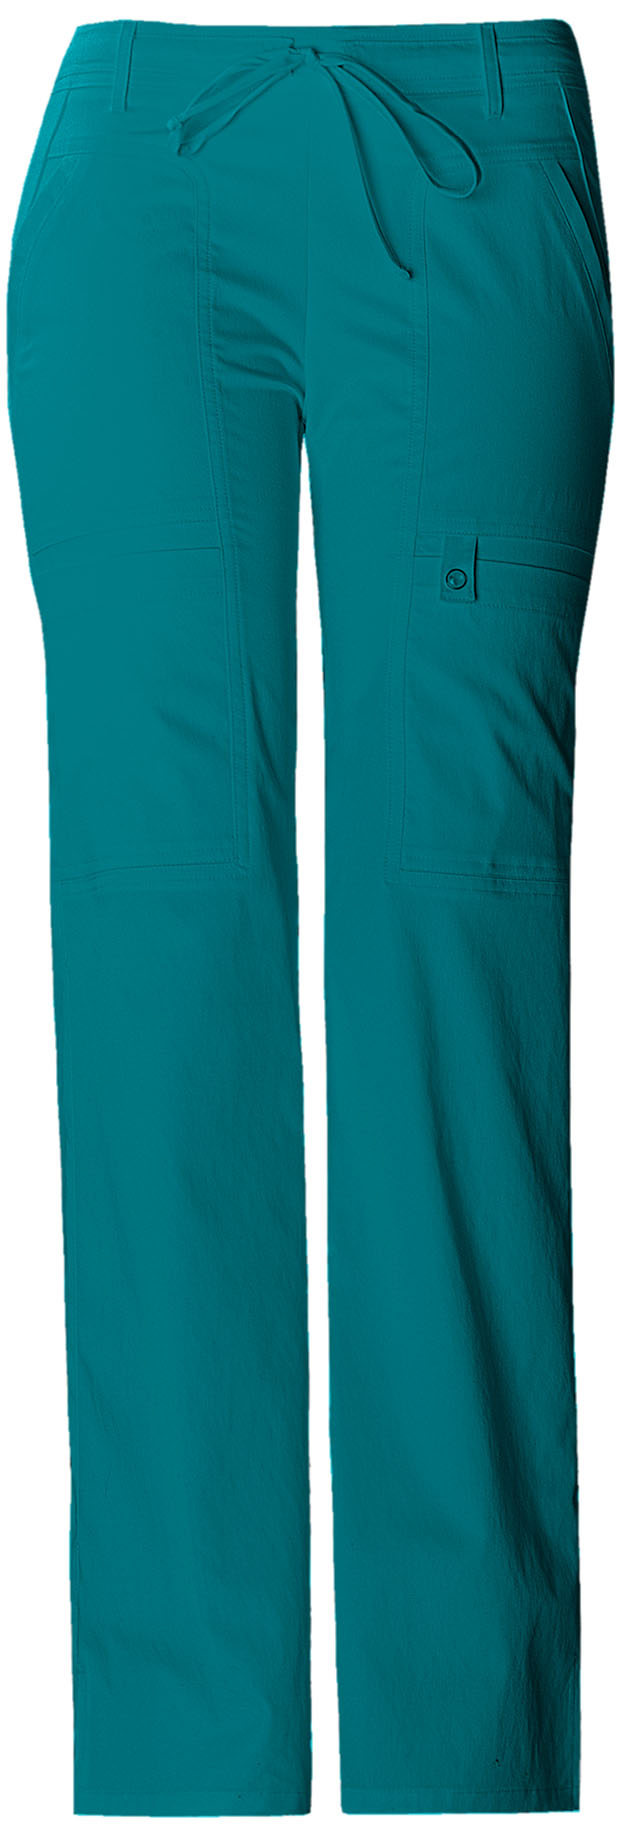 Details about   Cherokee Women's Low Rise Flare Leg Drawstring Cargo Pant 21100 FREE SHIPPING! 